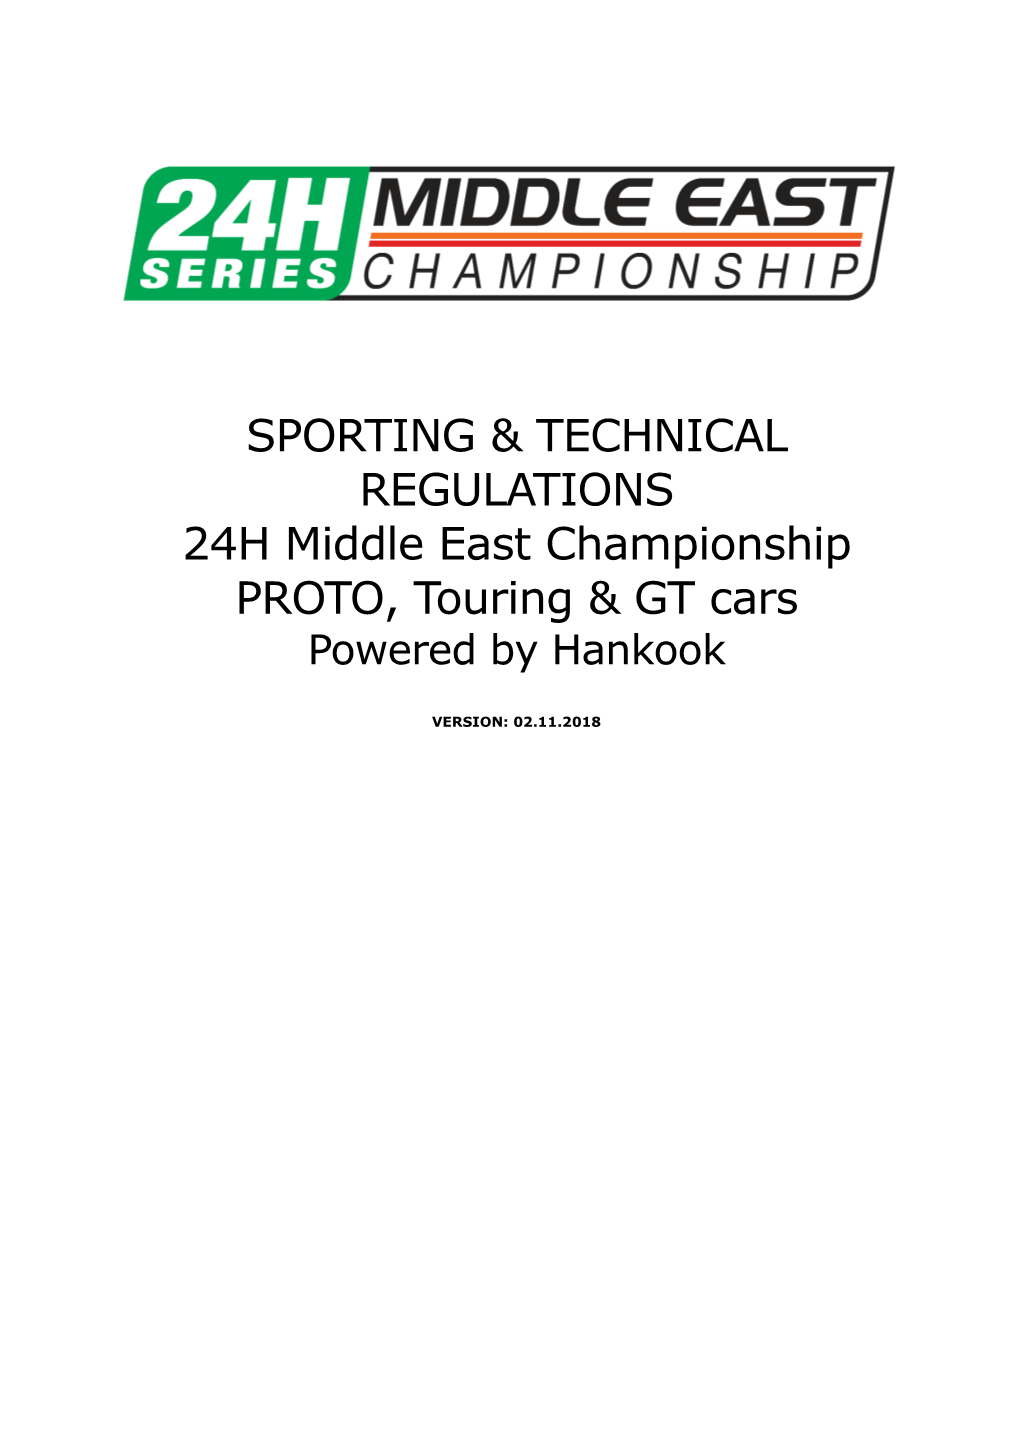 Sporting & Technical Regulations 24H